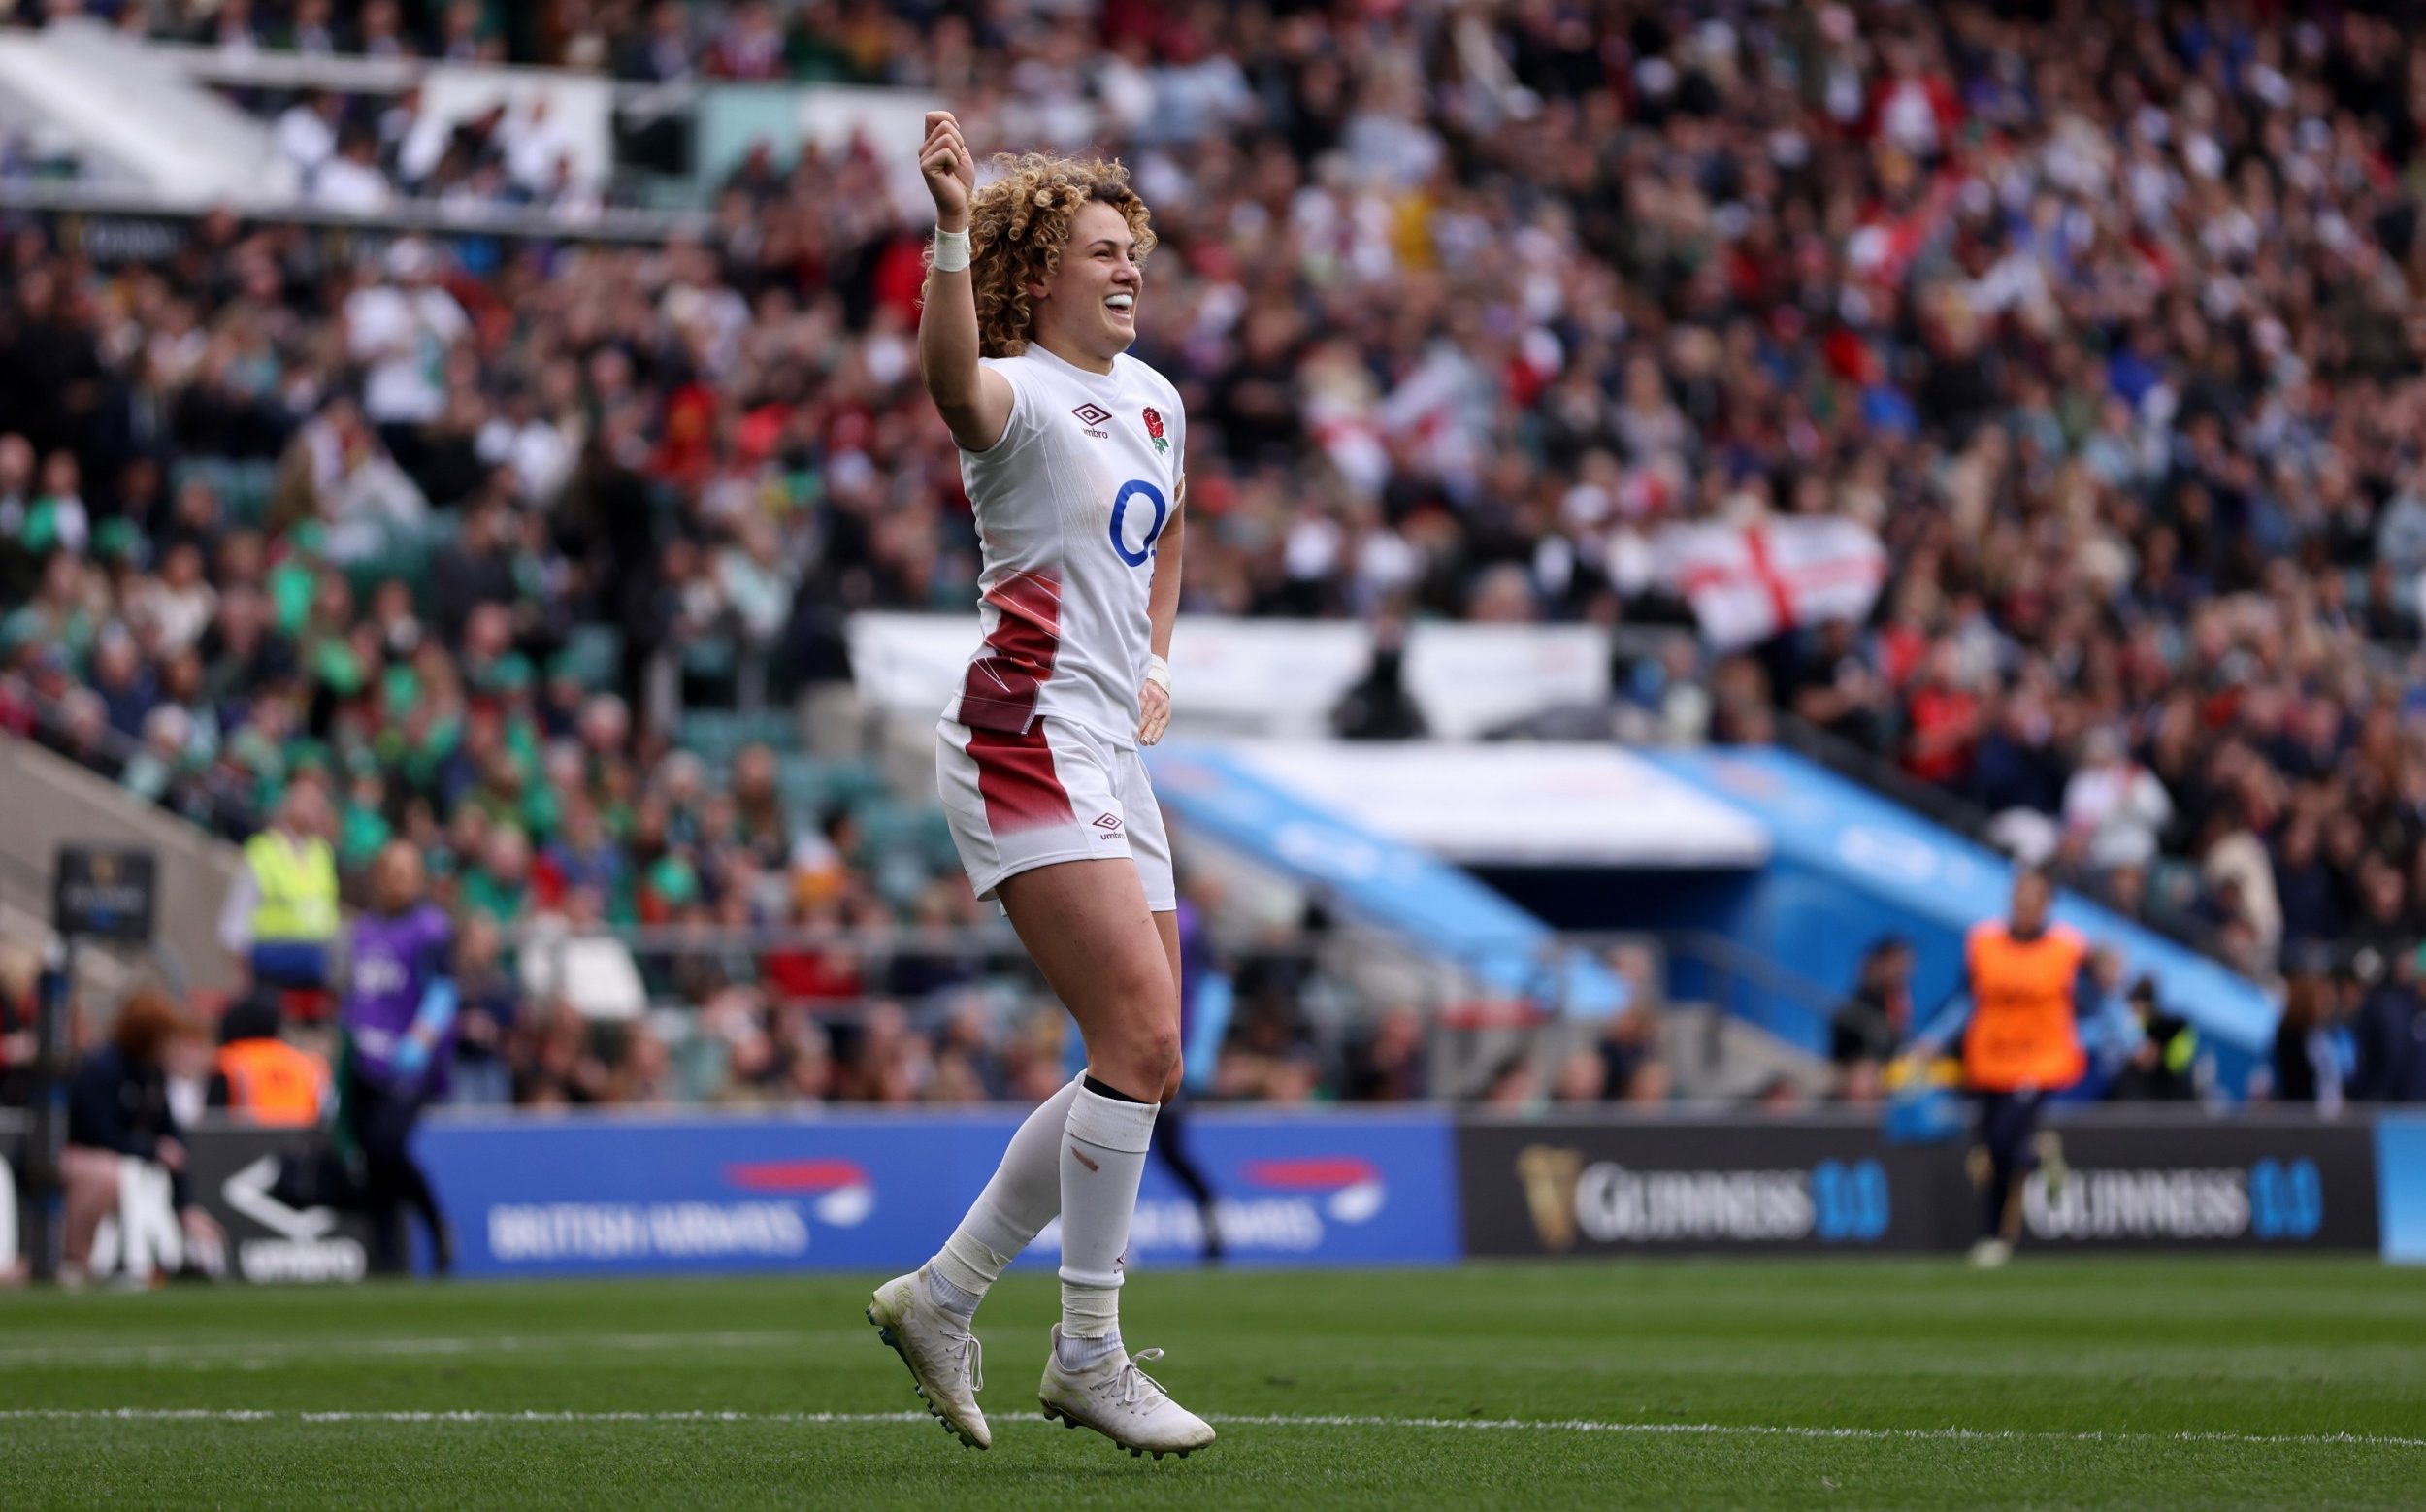 england thrash ireland 88-10 in women’s six nations rout